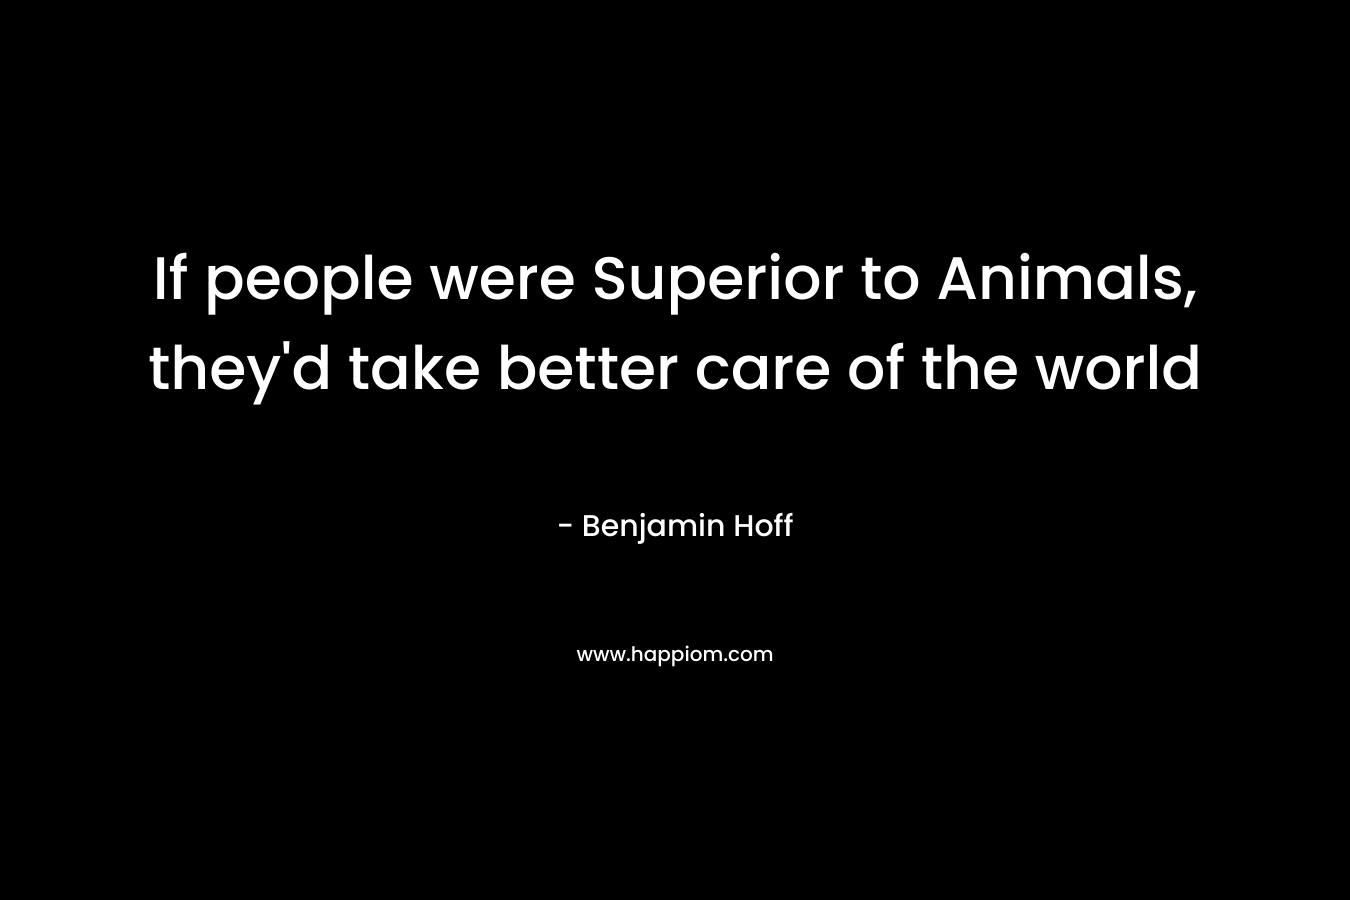 If people were Superior to Animals, they’d take better care of the world – Benjamin Hoff